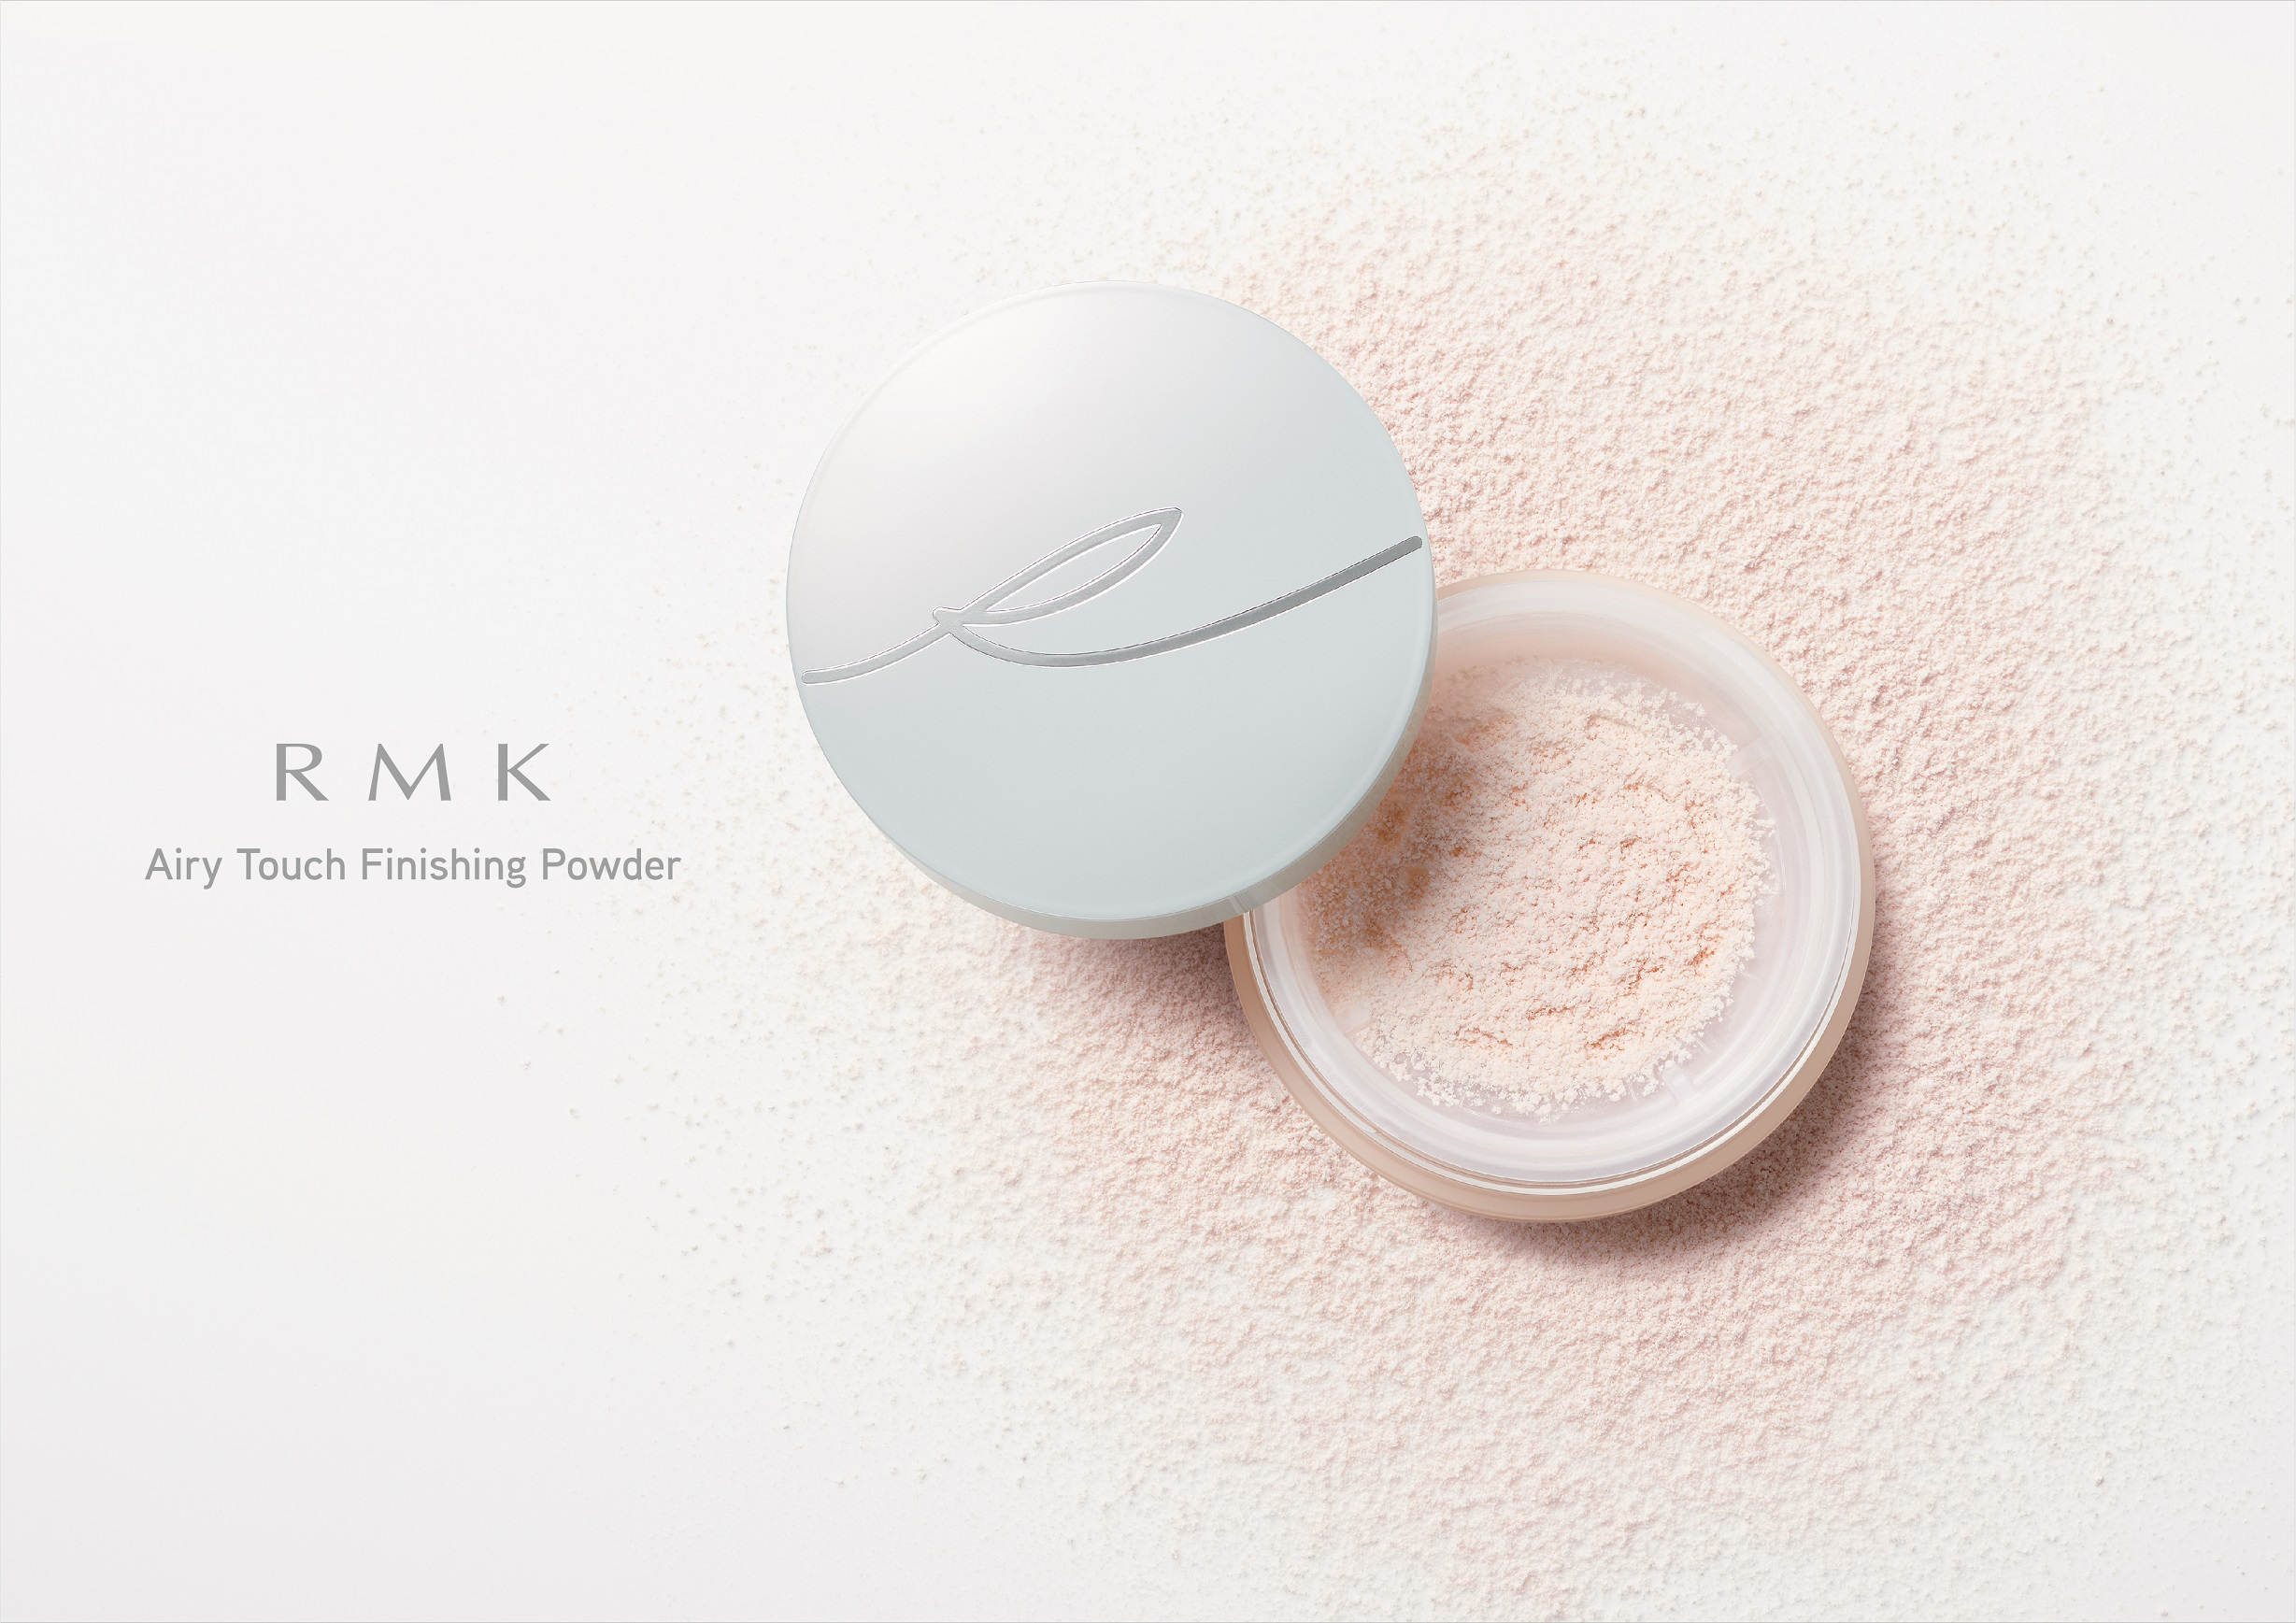 RMK_Airy Touch Finishing Powder_Product_Visual_small.jpg